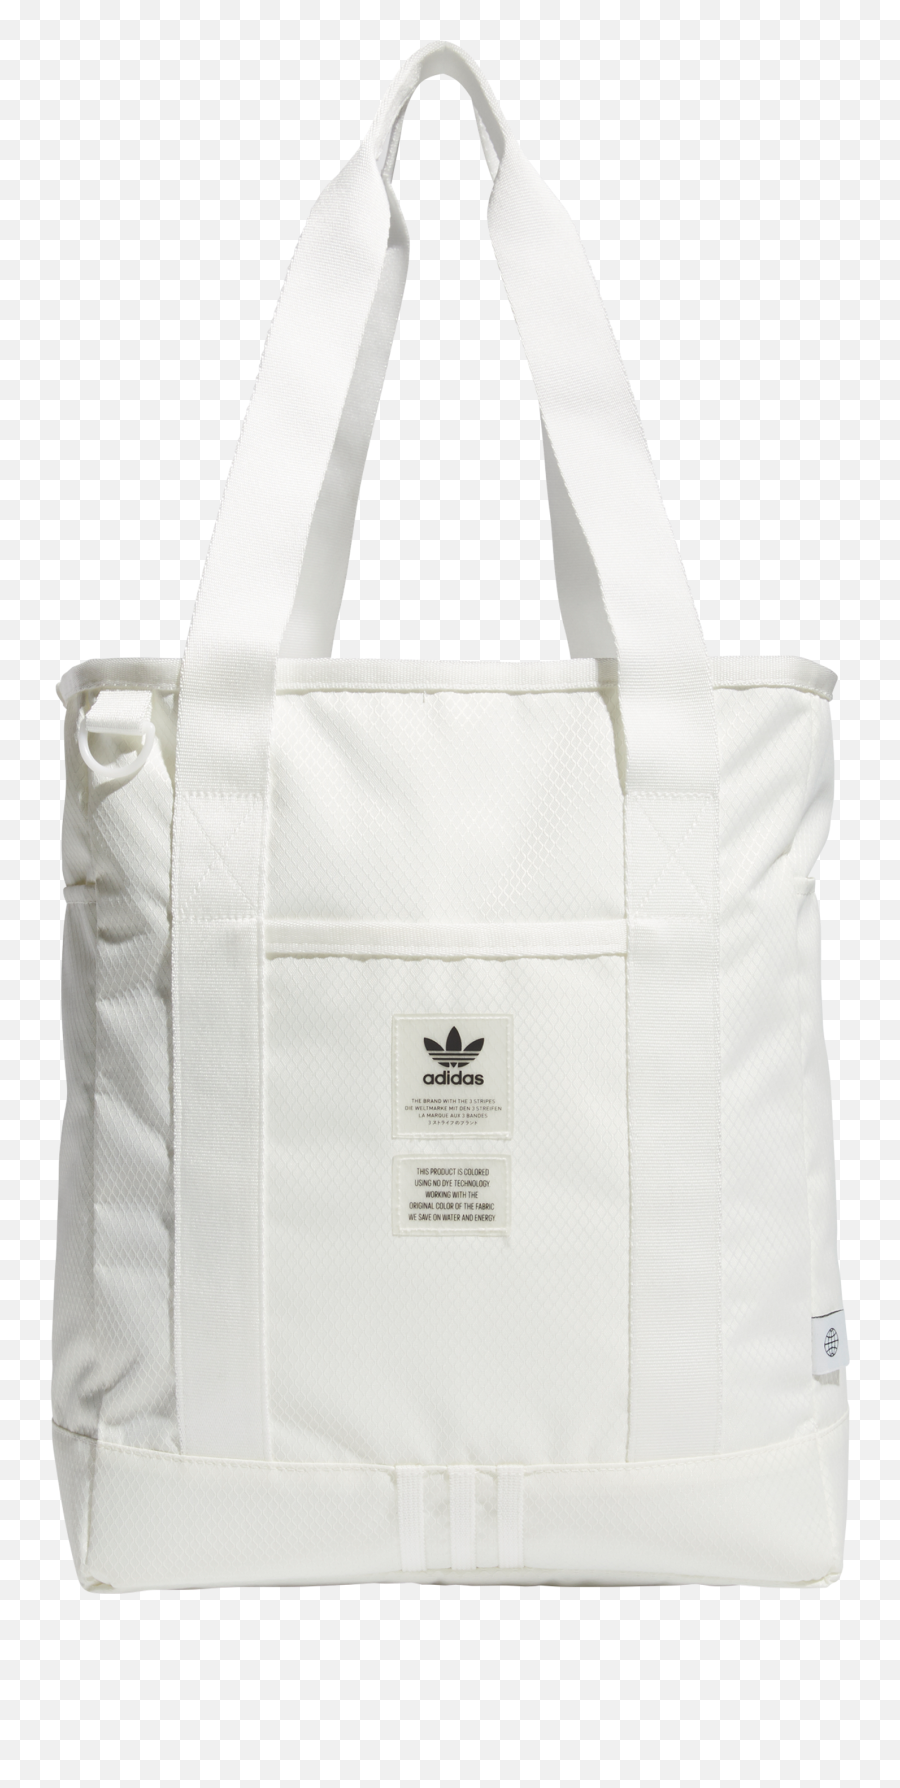 Adidas Originals Sport Tote Bag Png Boost Icon Cleats